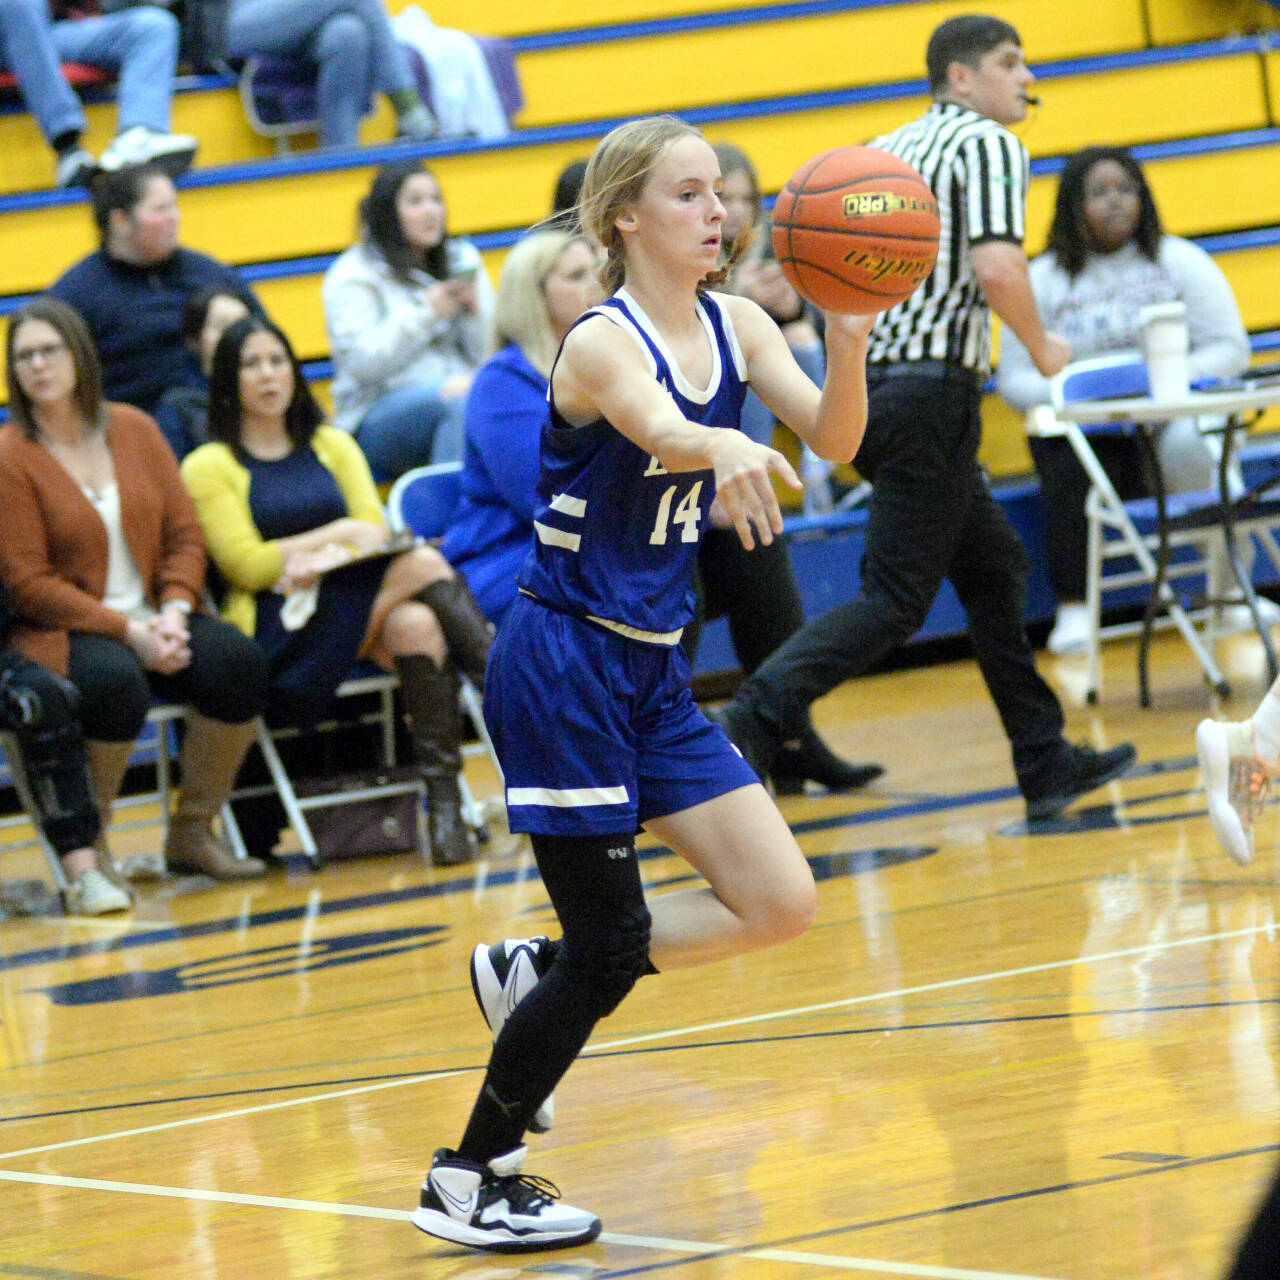 RYAN SPARKS | THE DAILY WORLD Elma junior Aaleigha Weld scored 12 points in a 61-35 loss to Aberdeen on Tuesday, Nov. 29, 2022 at Sam Benn Gym in Aberdeen.